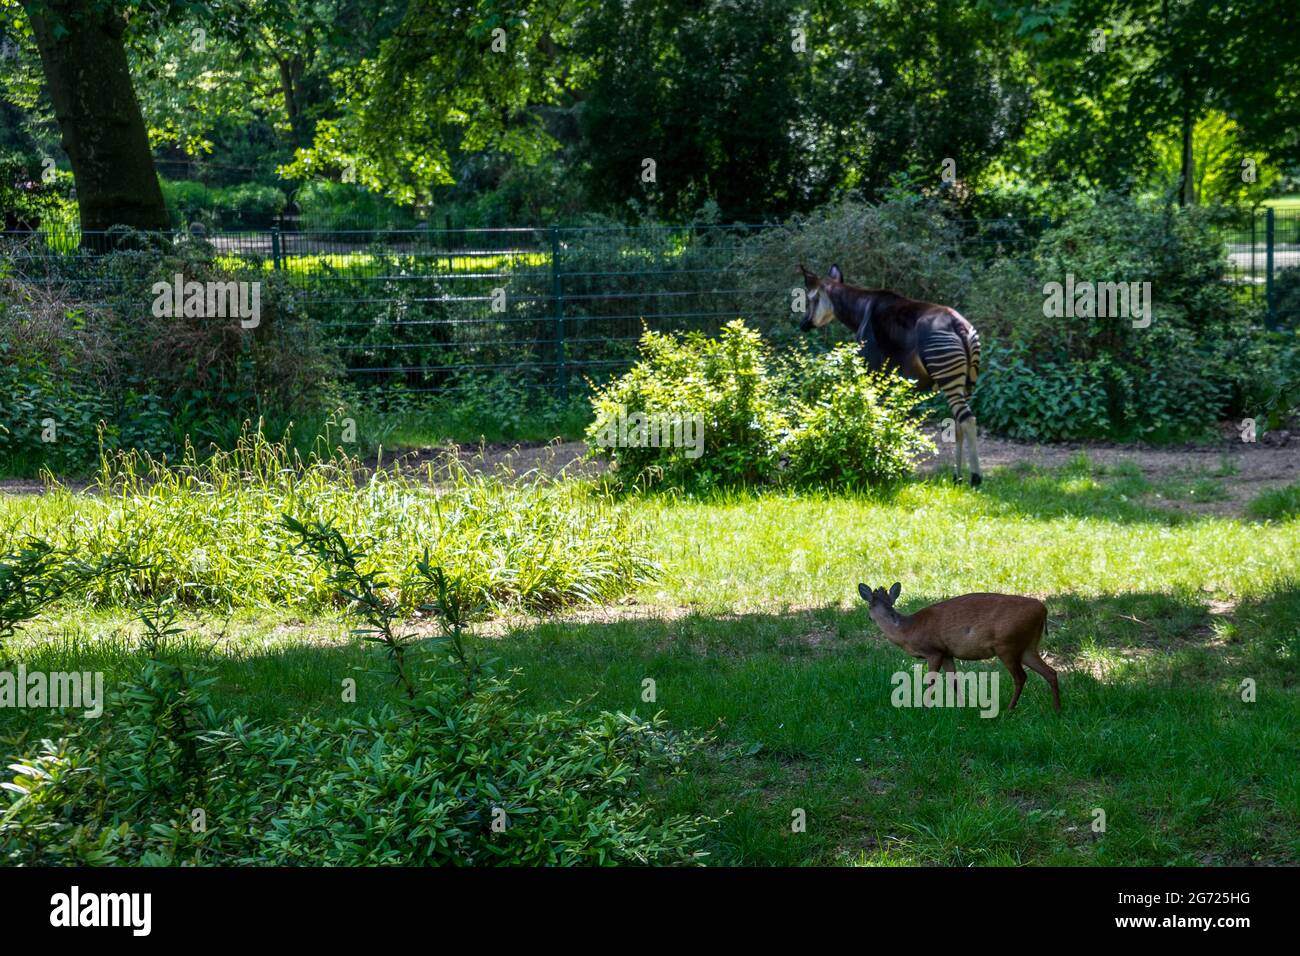 Snapshot from the The Aktiengesellschaft Cologne Zoological Garden in Cologne, Deutschland Stock Photo